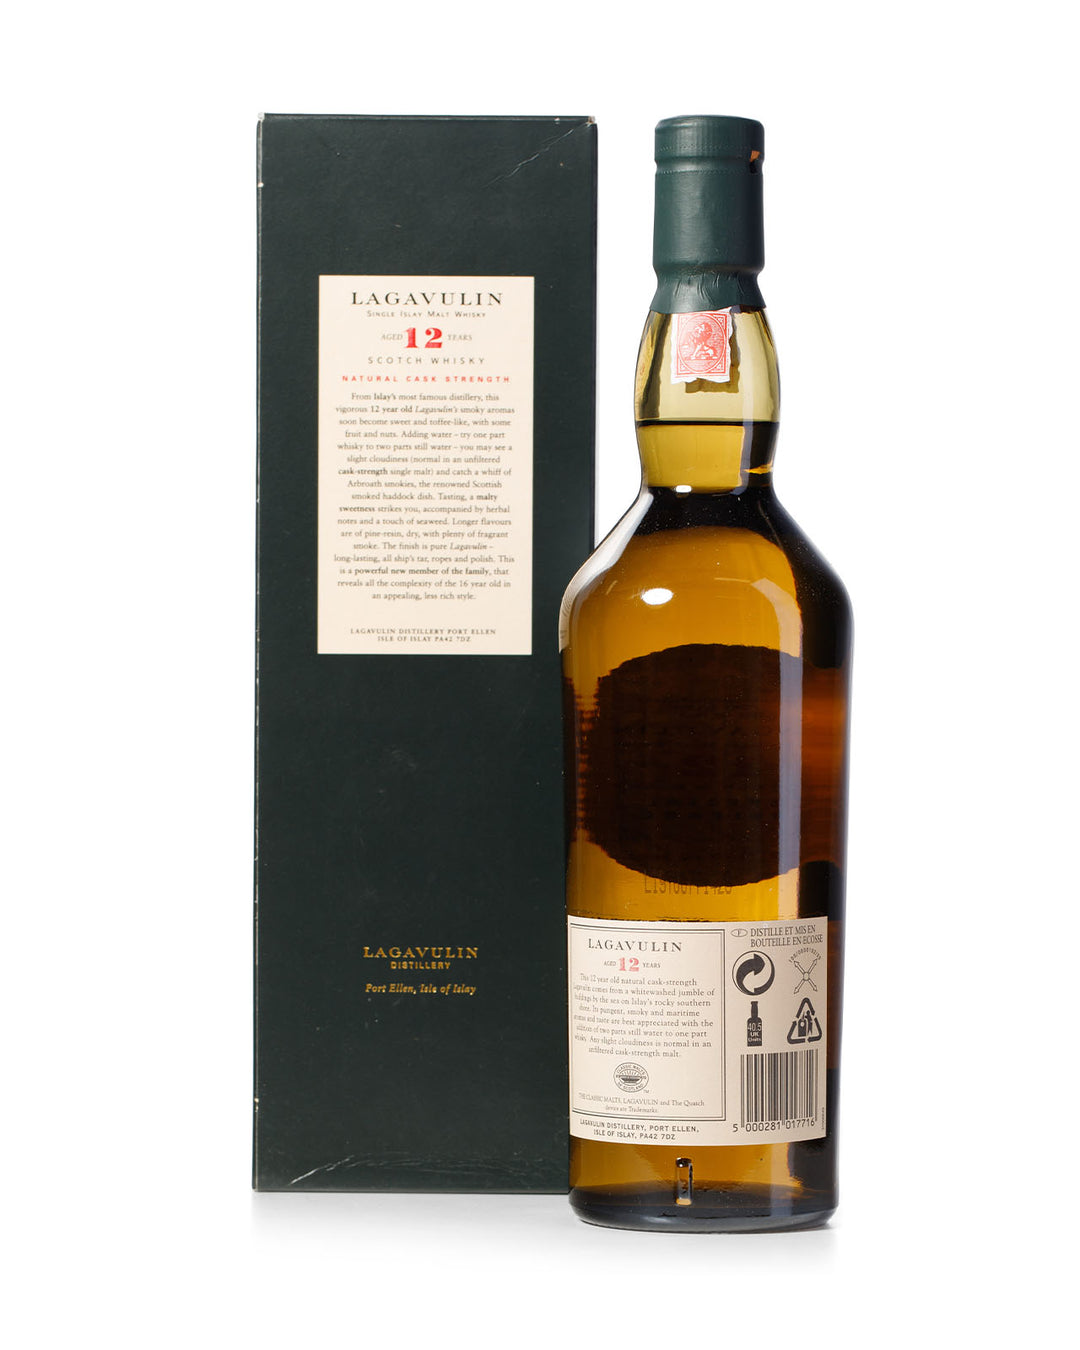 Lagavulin 12 Year Old Special Release Bottled 2003 With Original Box